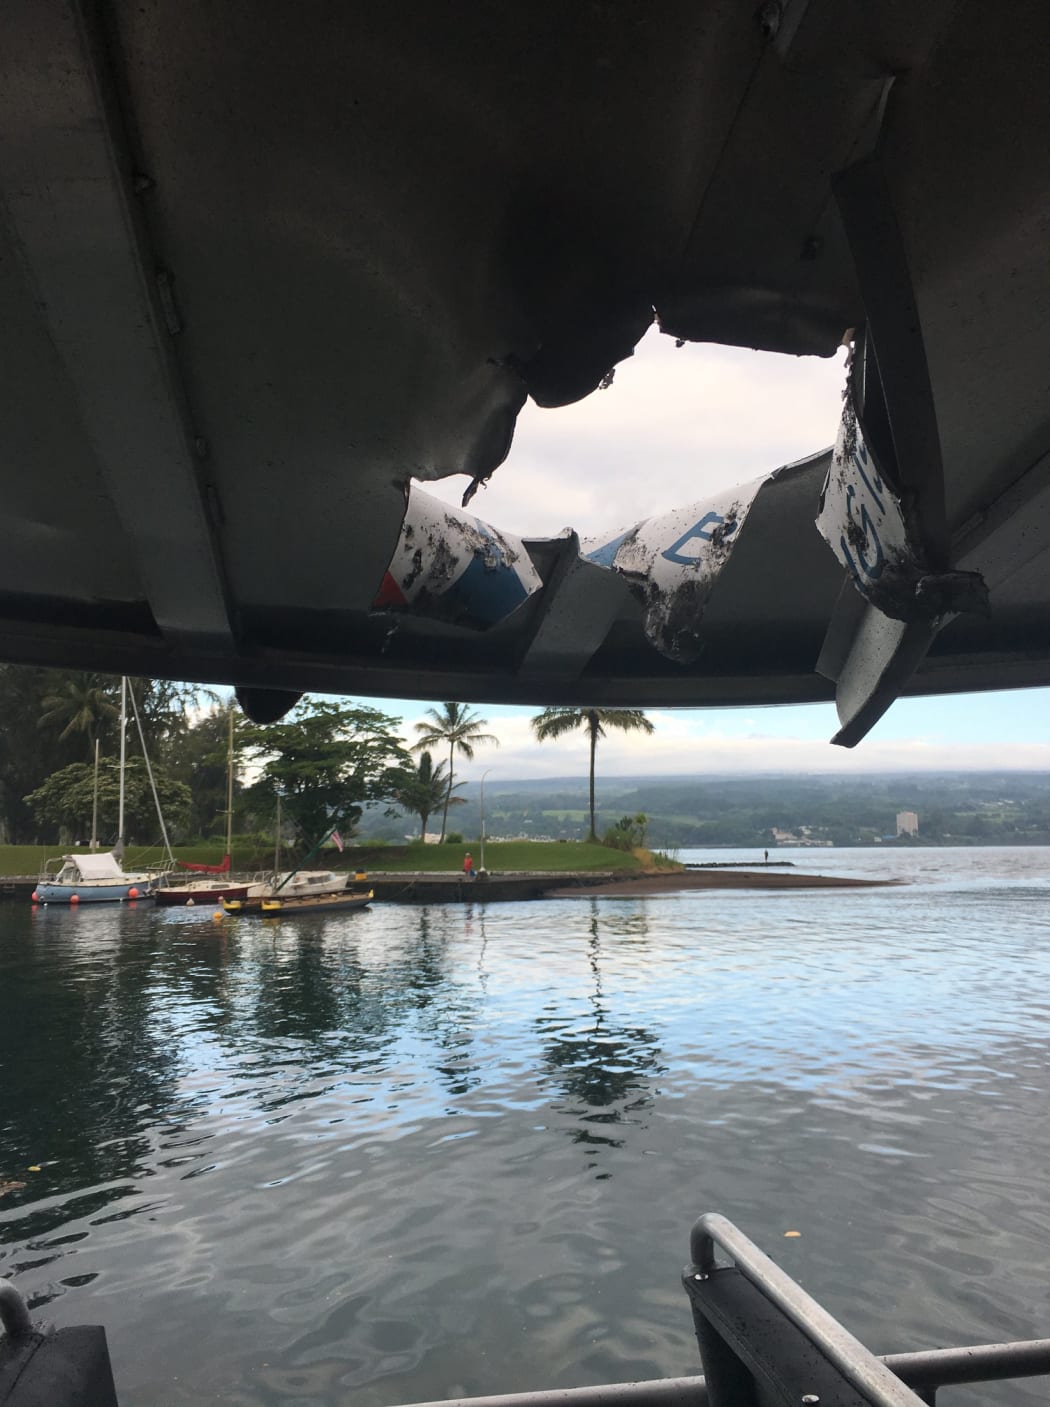 Rocks and debris in flying lava from the Kilauea volcano punched a hole through the roof of a tourist boat and injured passengers.